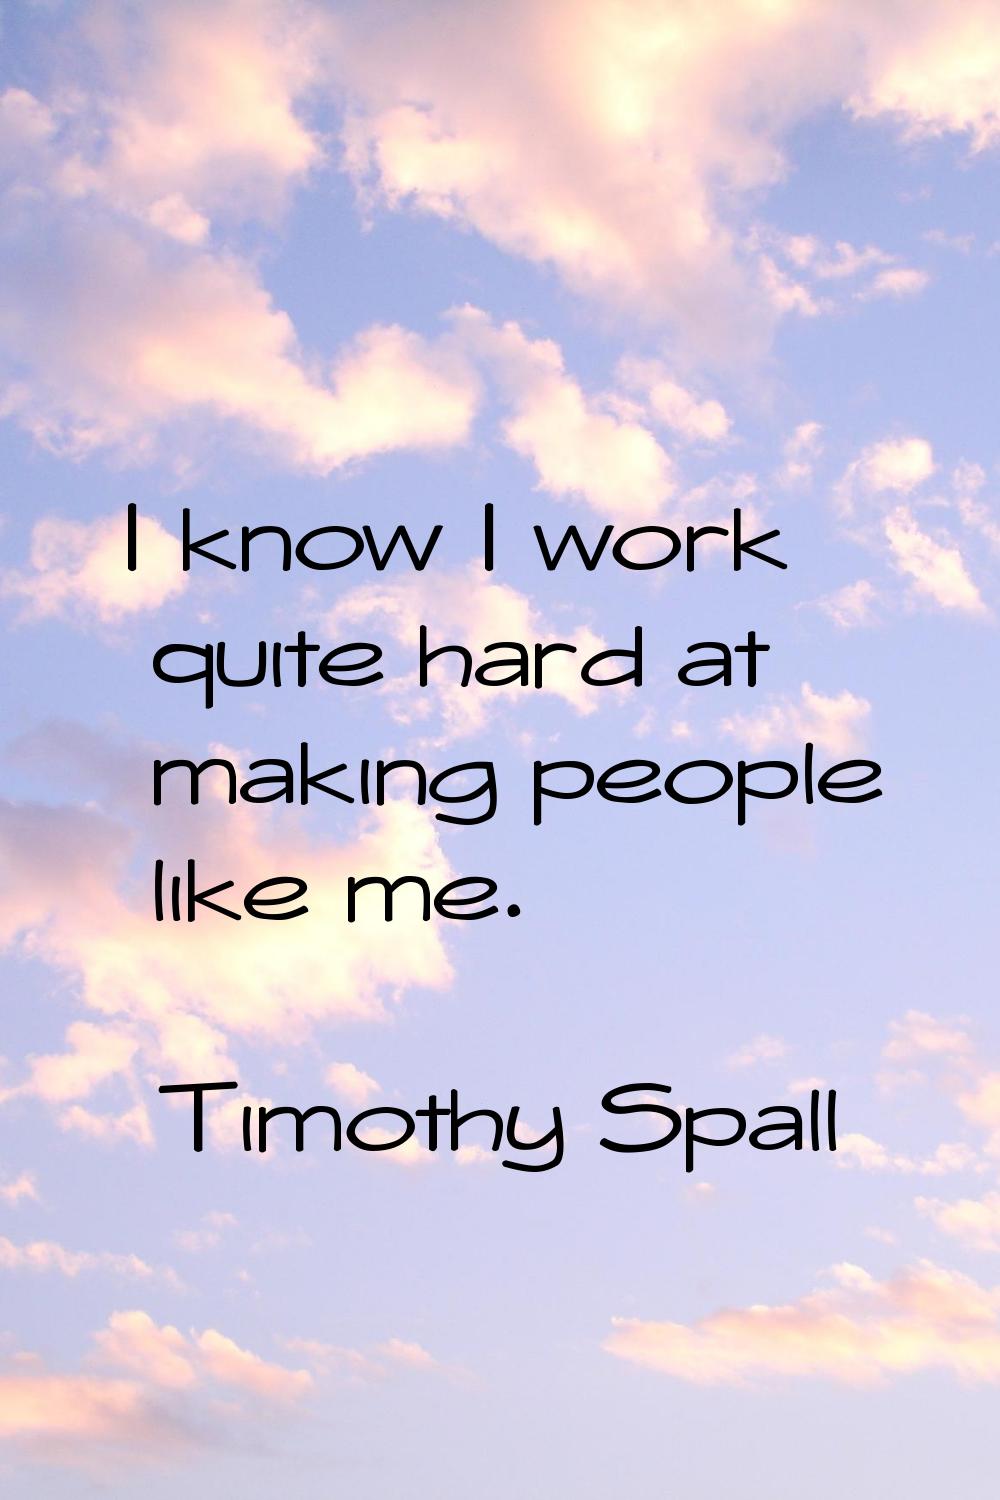 I know I work quite hard at making people like me.